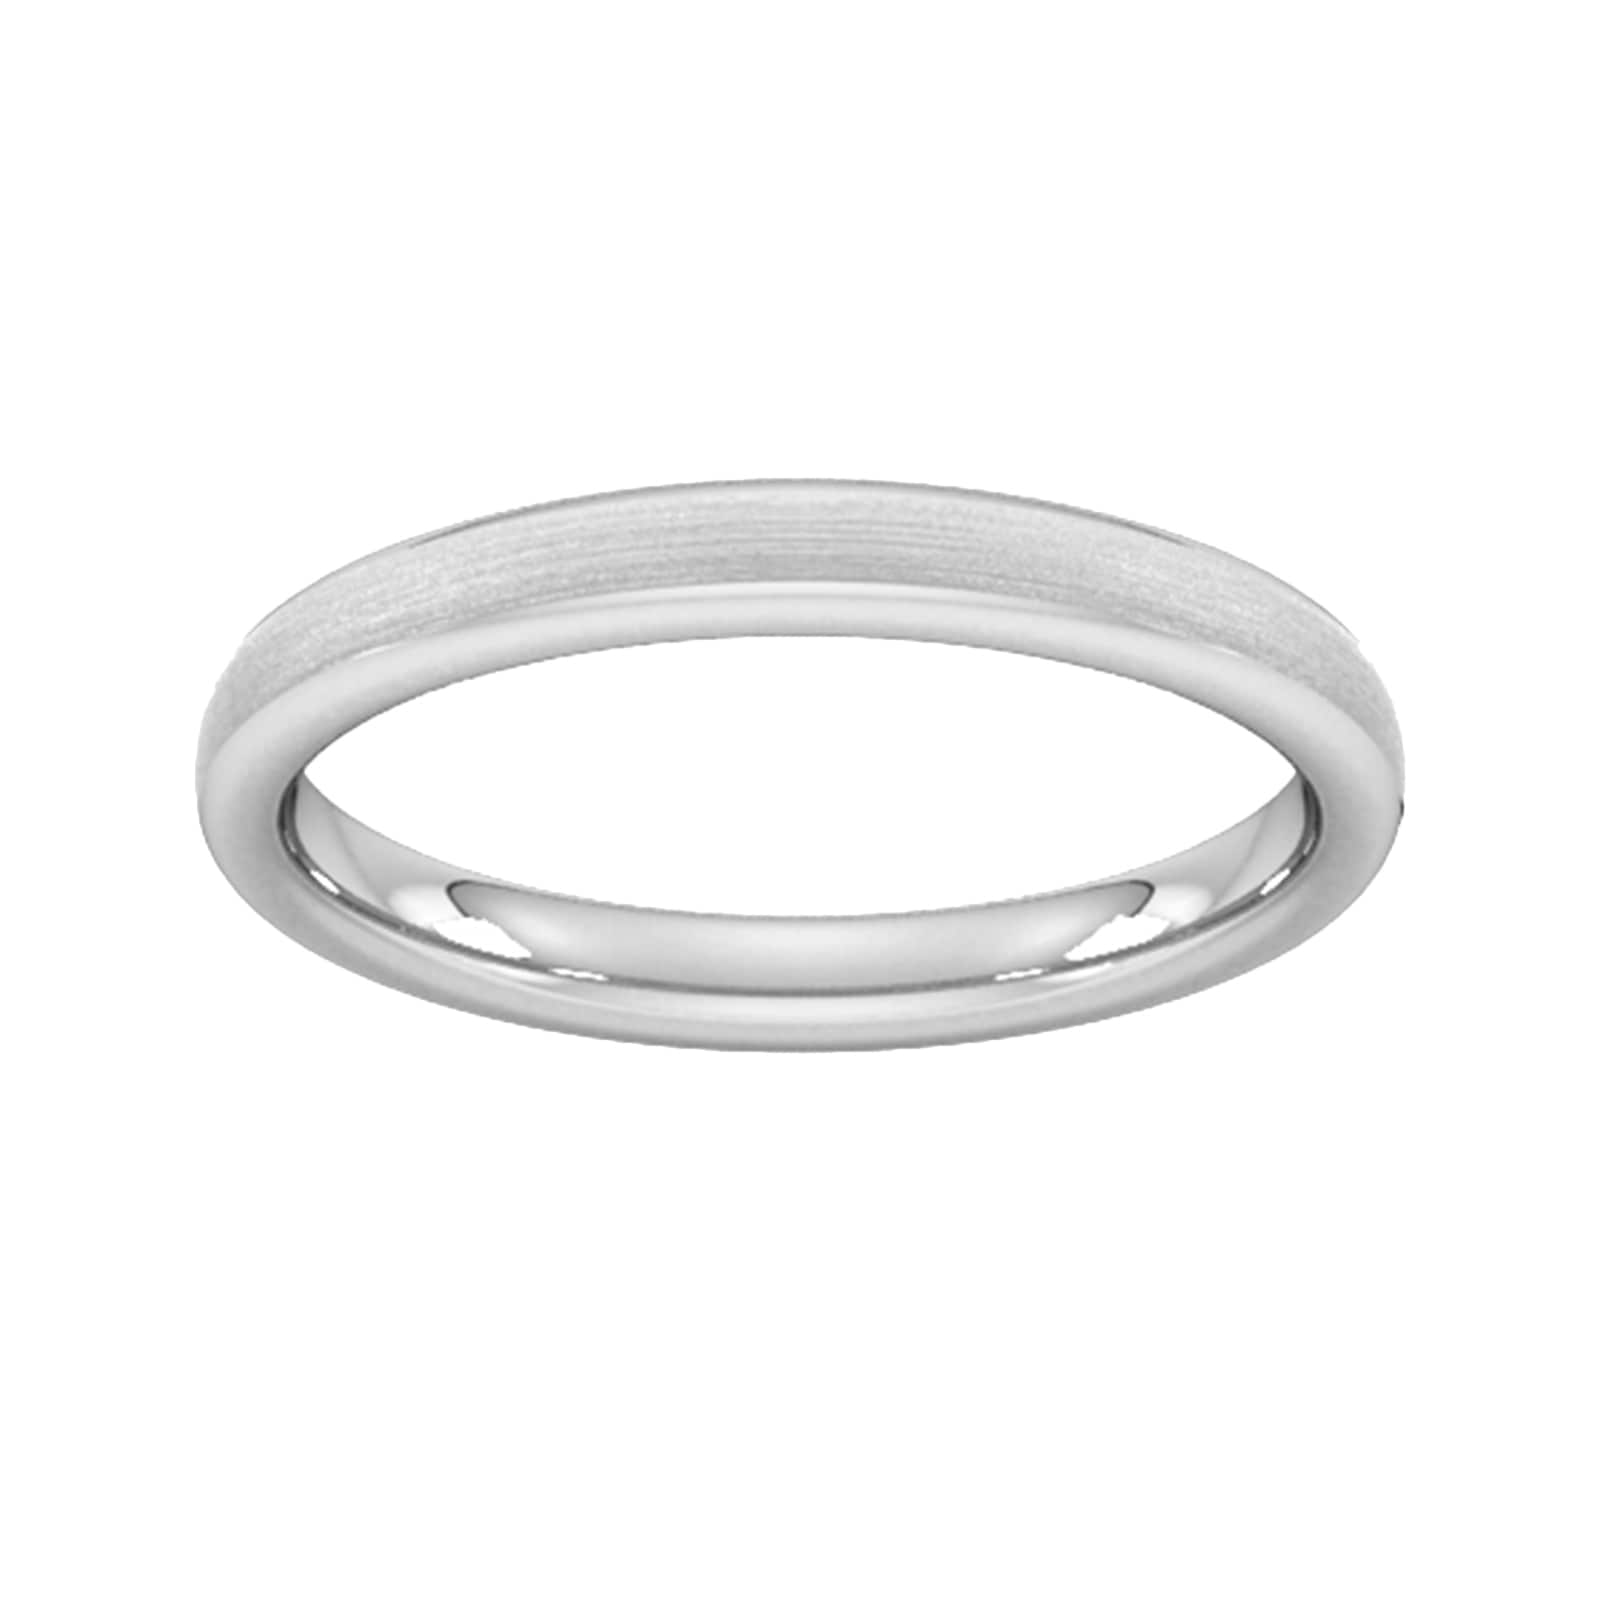 2.5mm Flat Court Heavy Matt Finished Wedding Ring In 9 Carat White Gold - Ring Size N